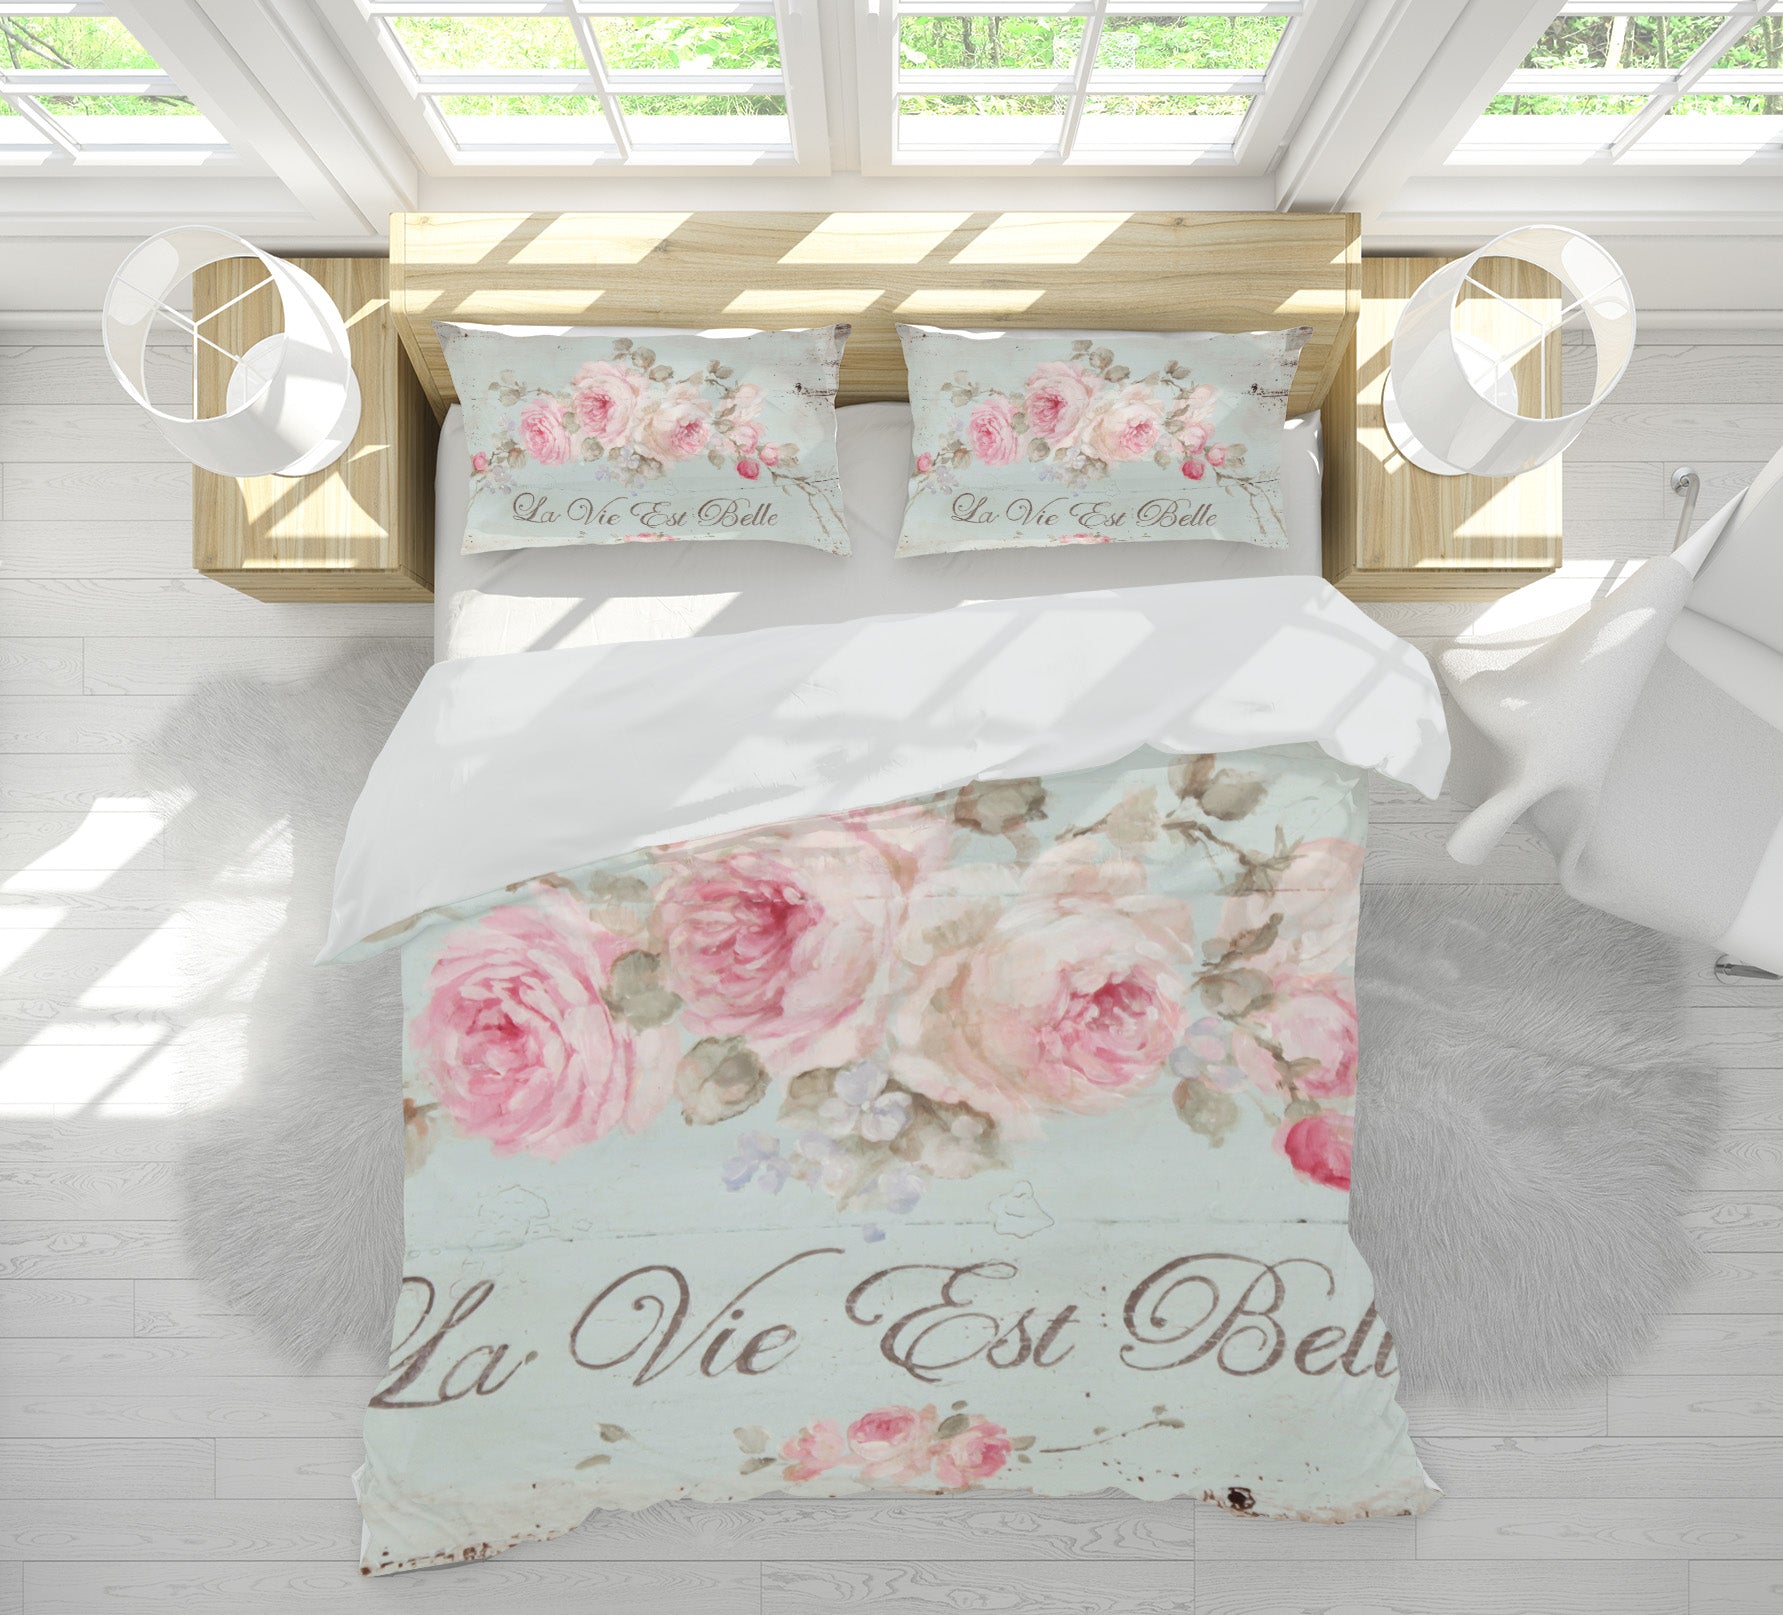 3D Pink Rose 033 Debi Coules Bedding Bed Pillowcases Quilt